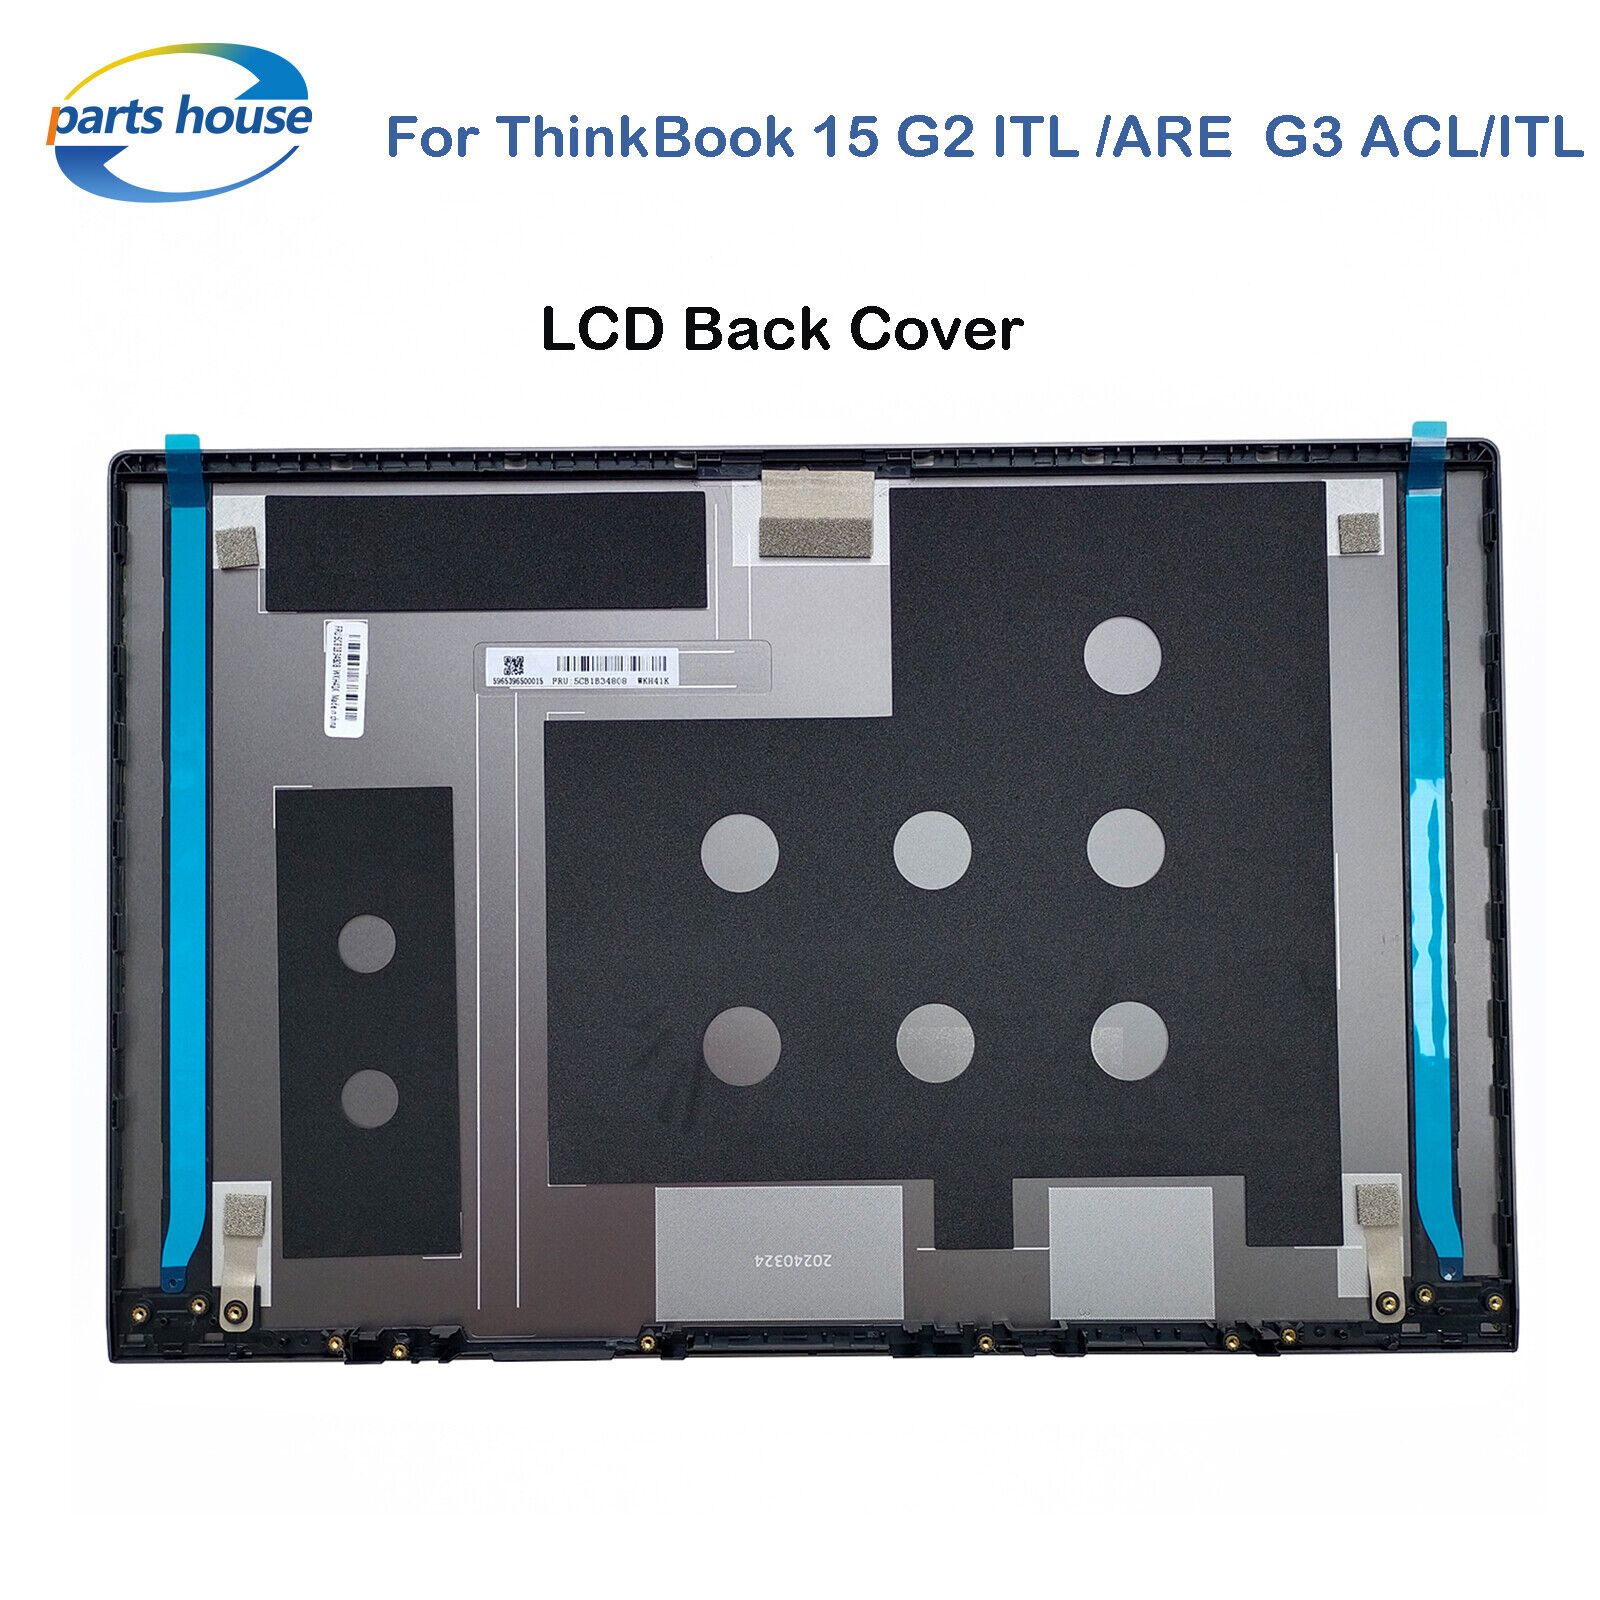 New For Lenovo ThinkBook 15 G2 ITL /ARE 15 G3 ACL/ITL Back Cover/Bezel/Hinge/HC